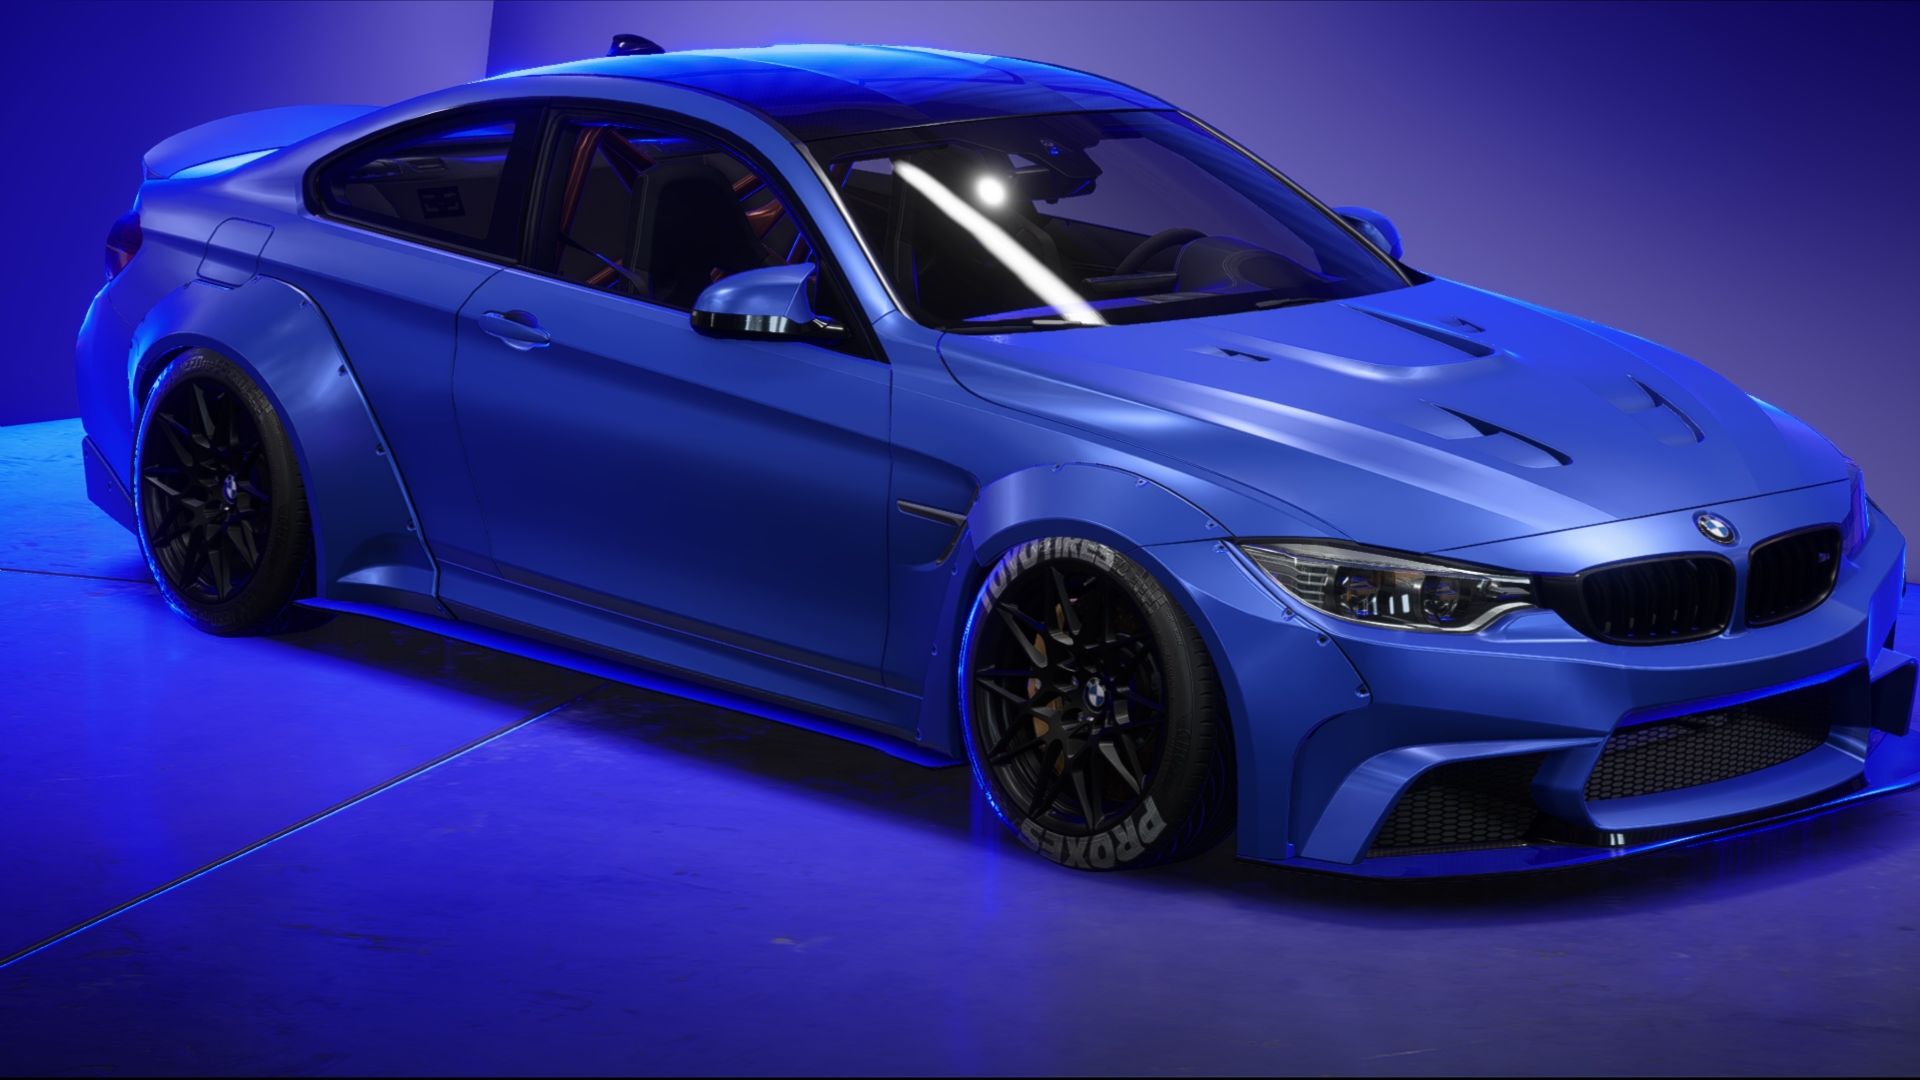 Blue, bmw, need for speed payback, video game wallpaper, HD image, picture, background, 44a0e5